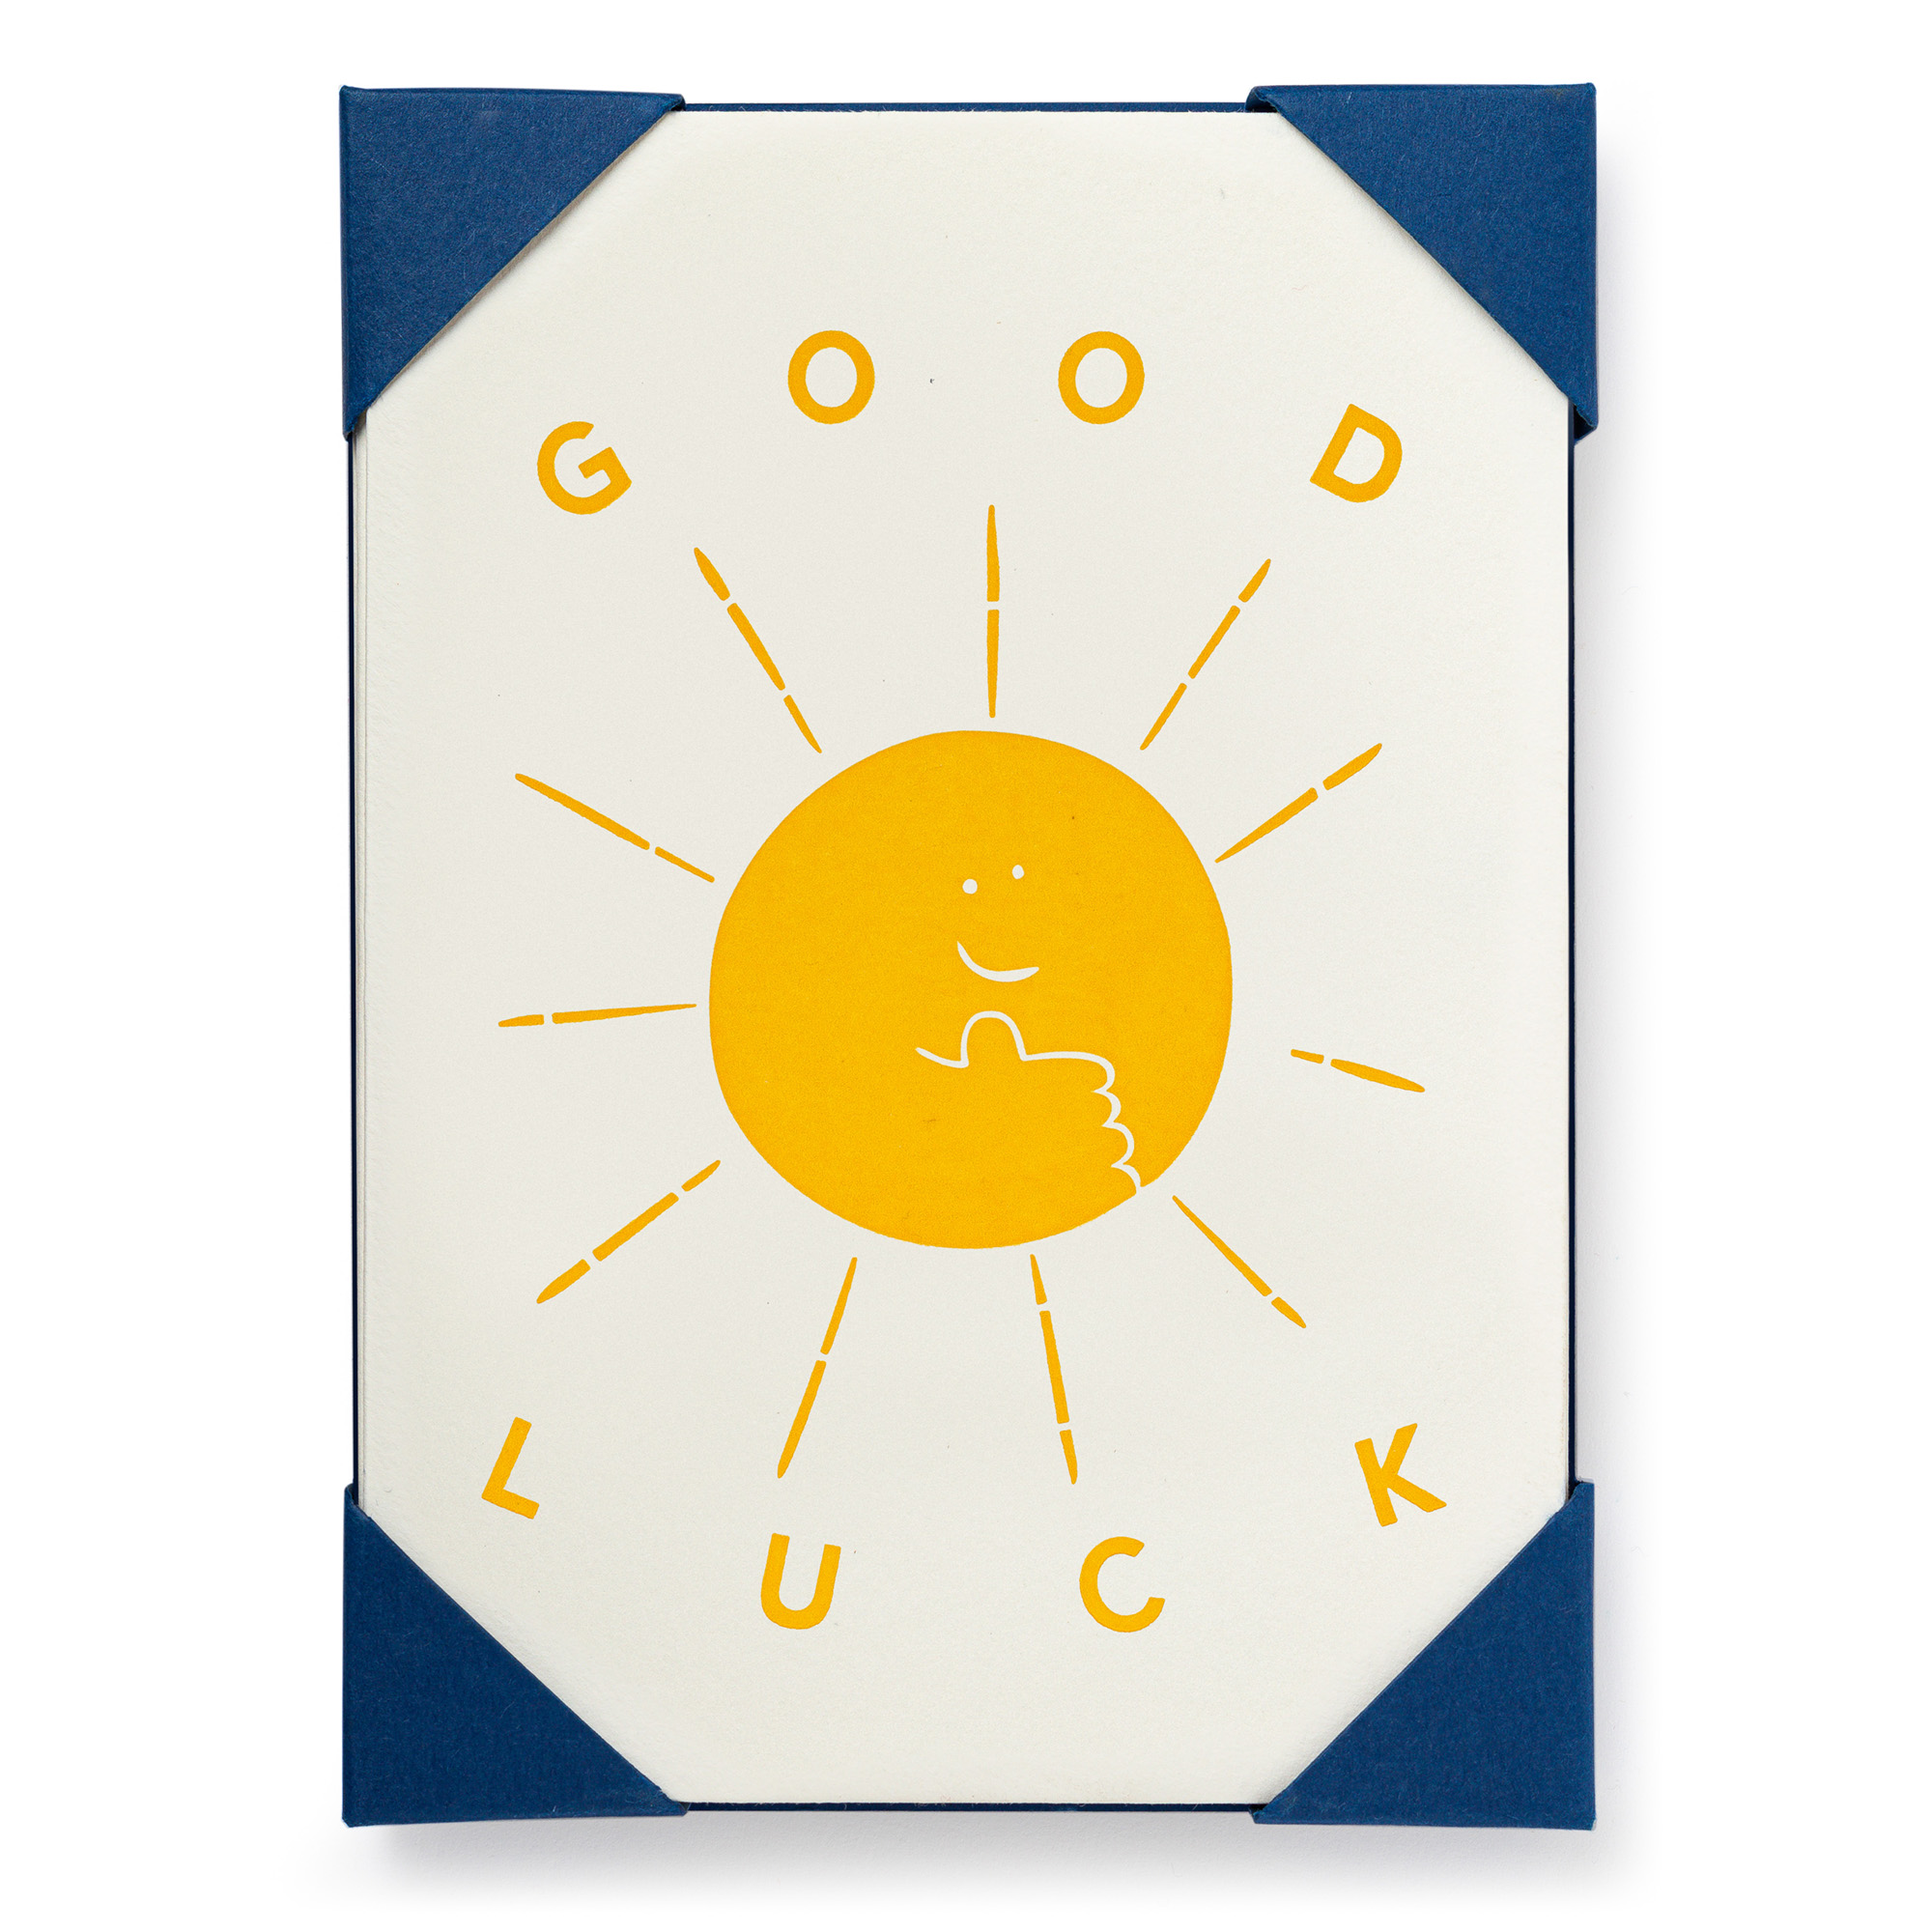 Good luck Sun - Notelets Packs - Paula Hirst - from Archivist Gallery 